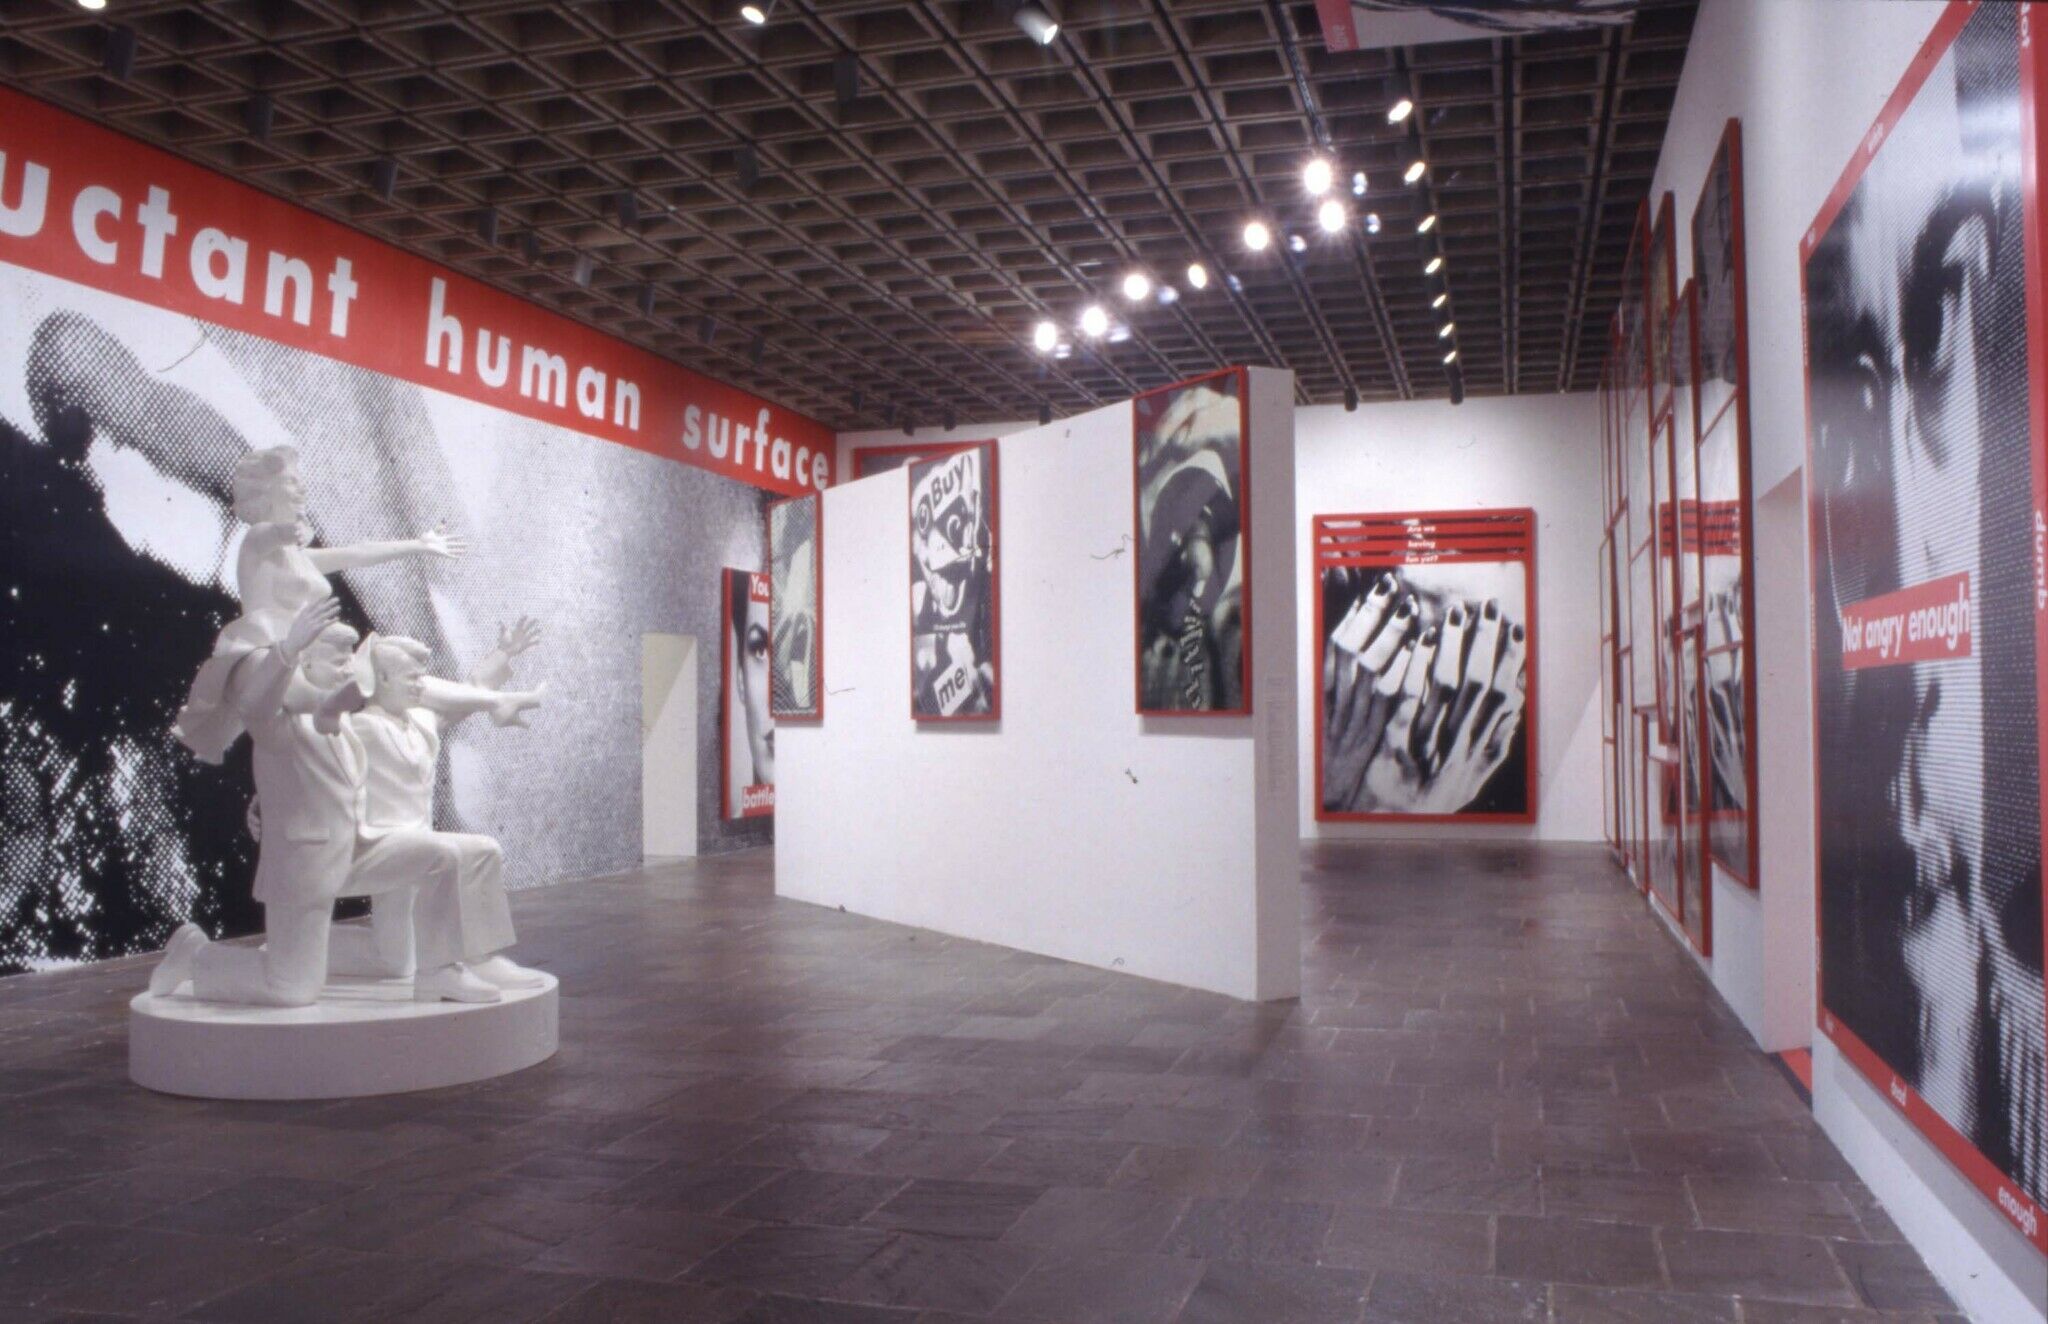 A gallery with a white sculpture and works of art composed of black and white photography with red details and text.